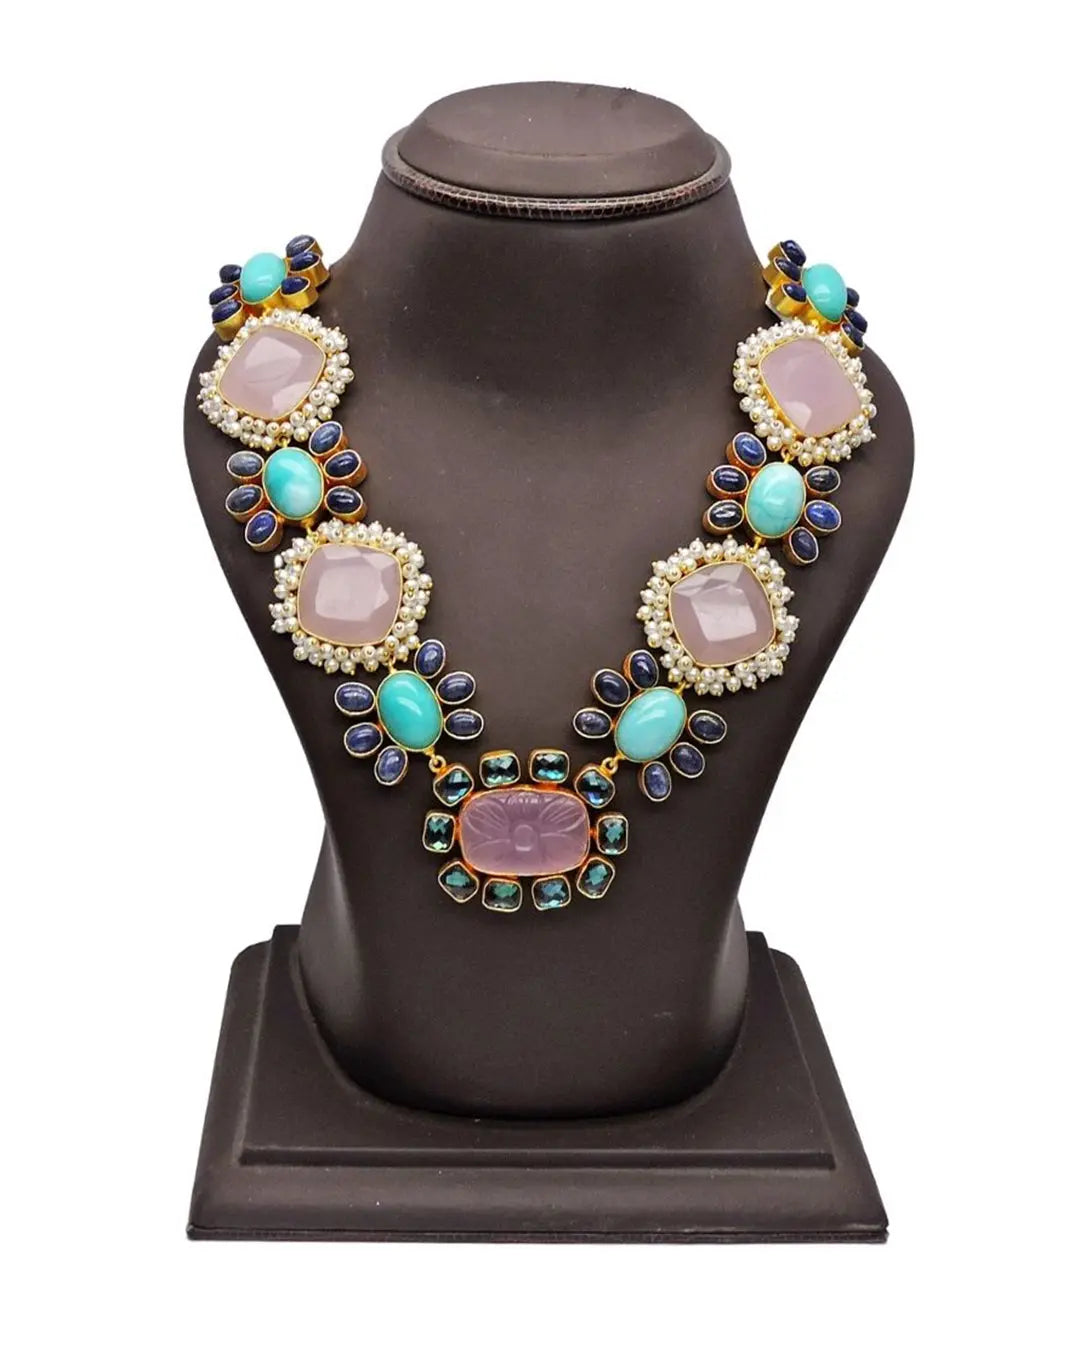 Awamira Necklace- Handcrafted Jewellery from Dori